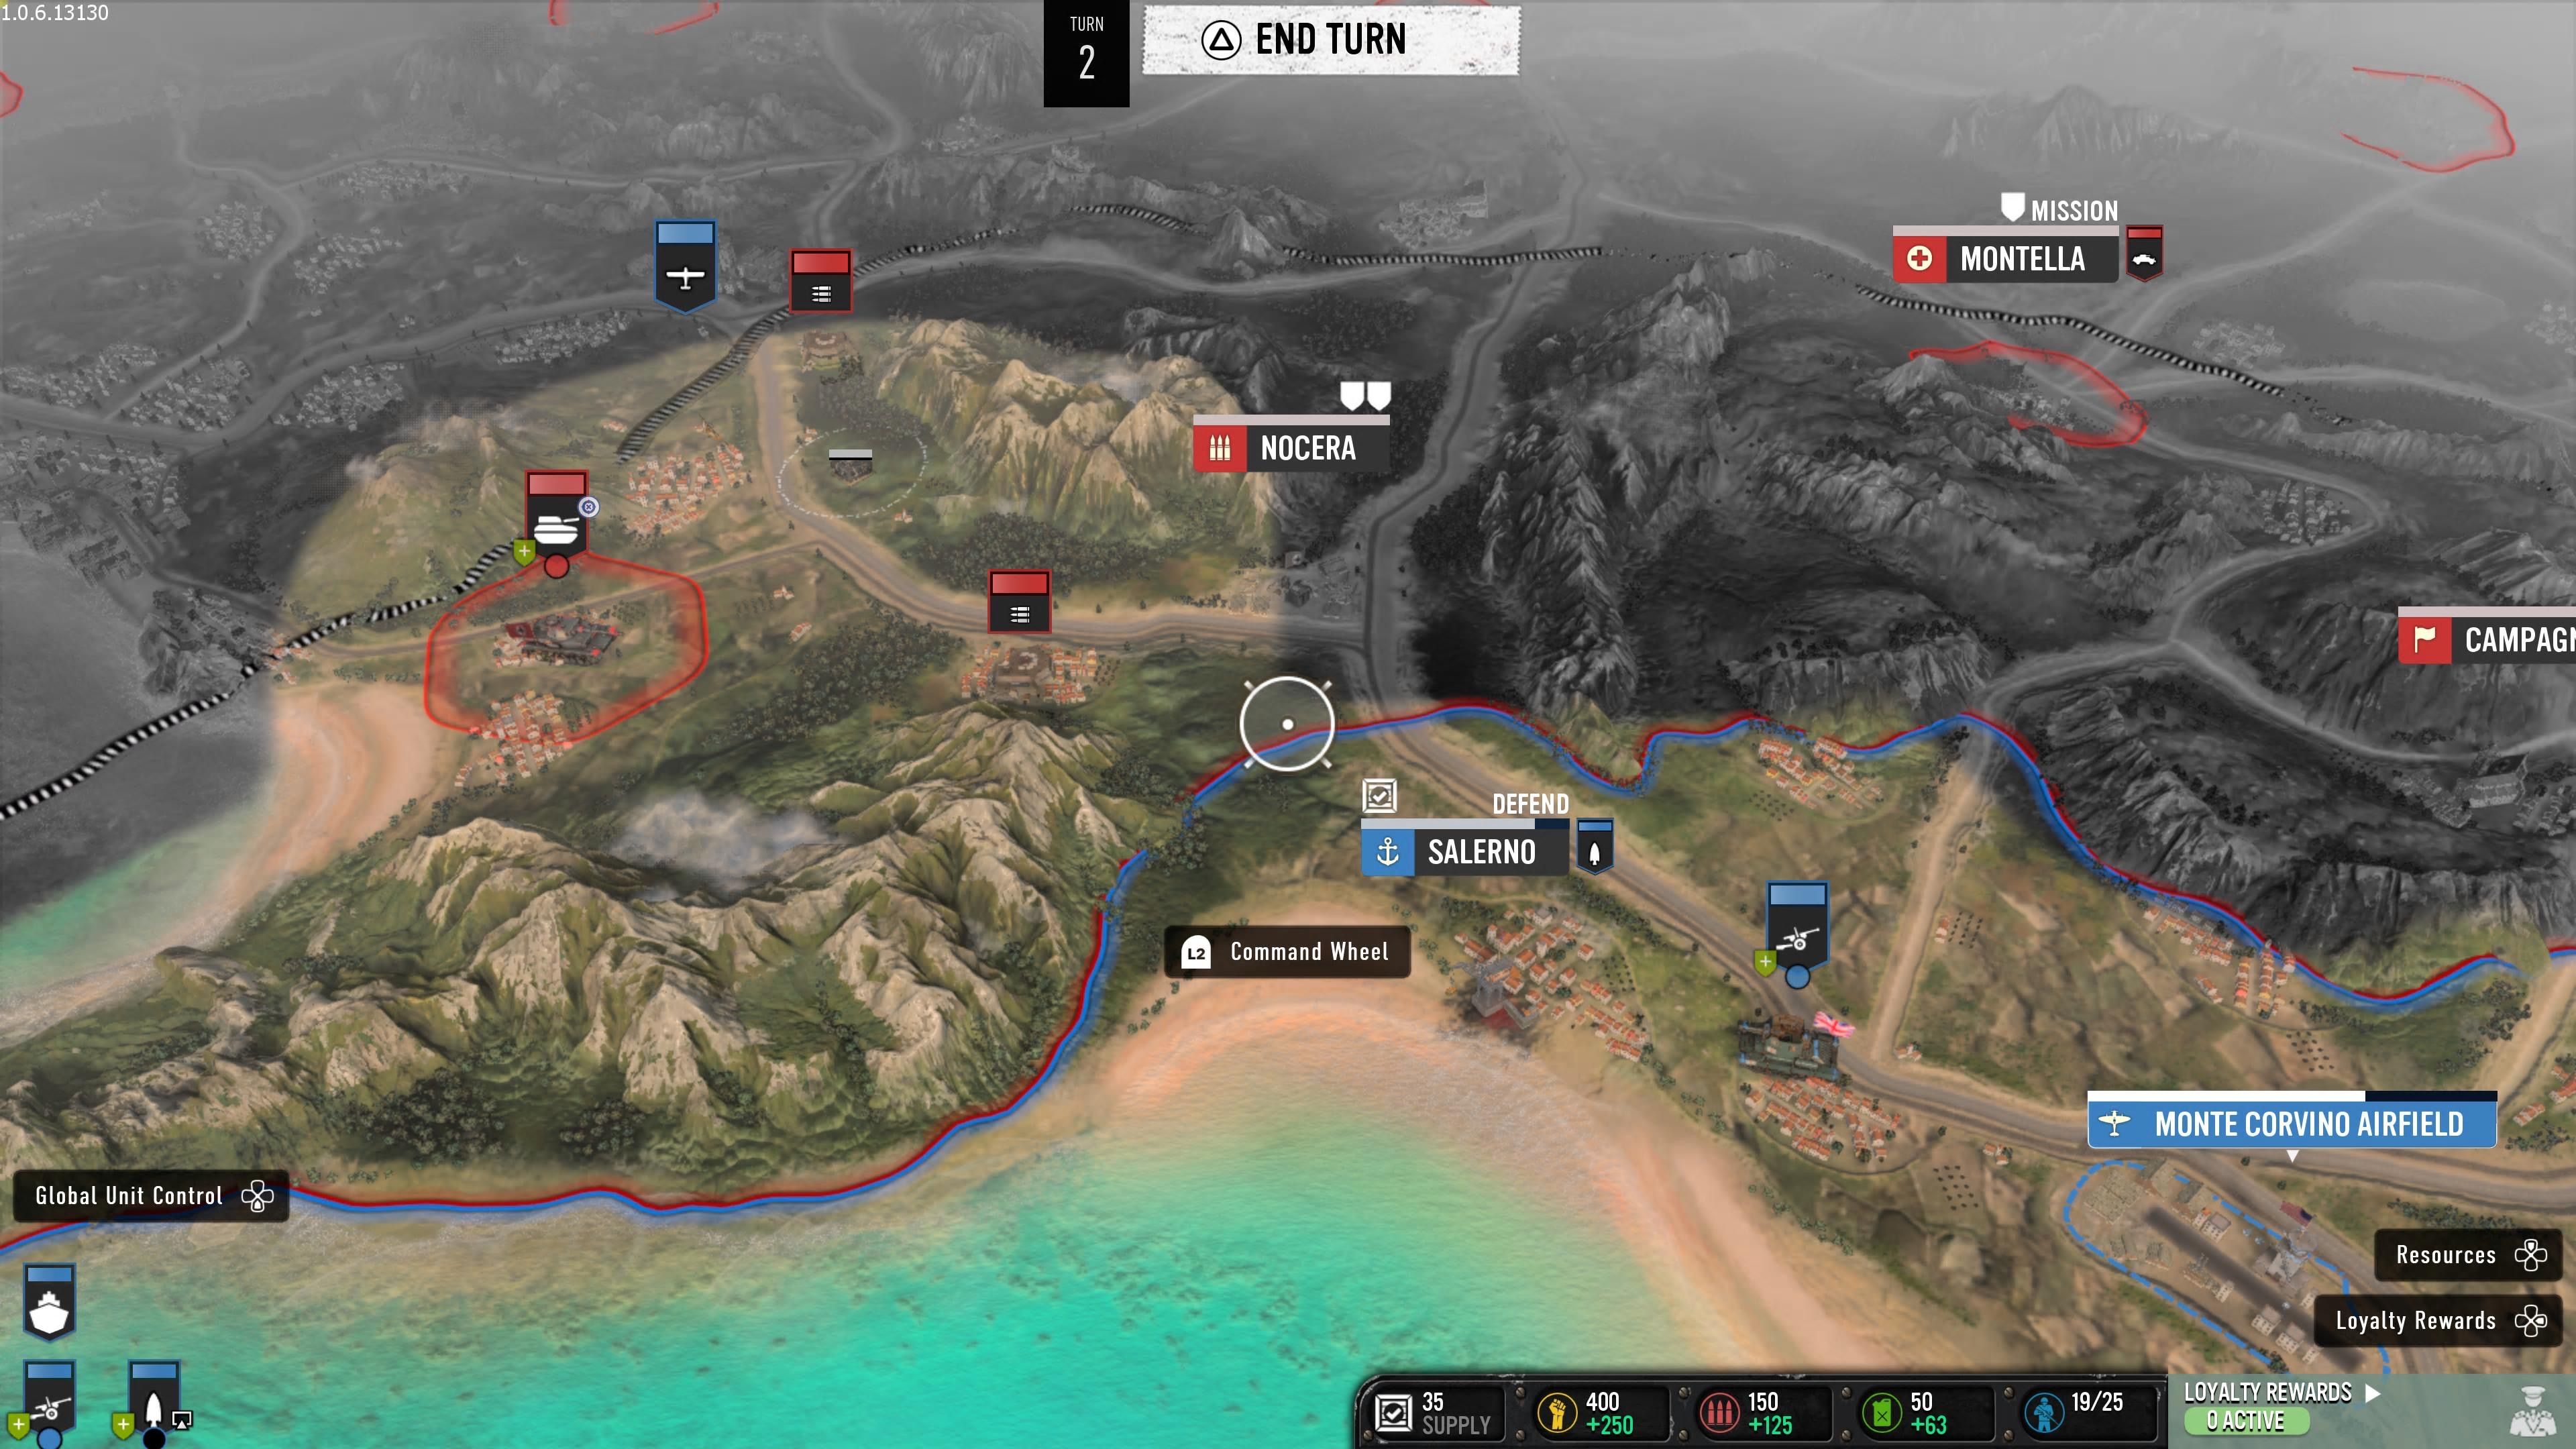 Screenshot from Company of Heroes 3 showing the Italy map players use in the Italian campaign.